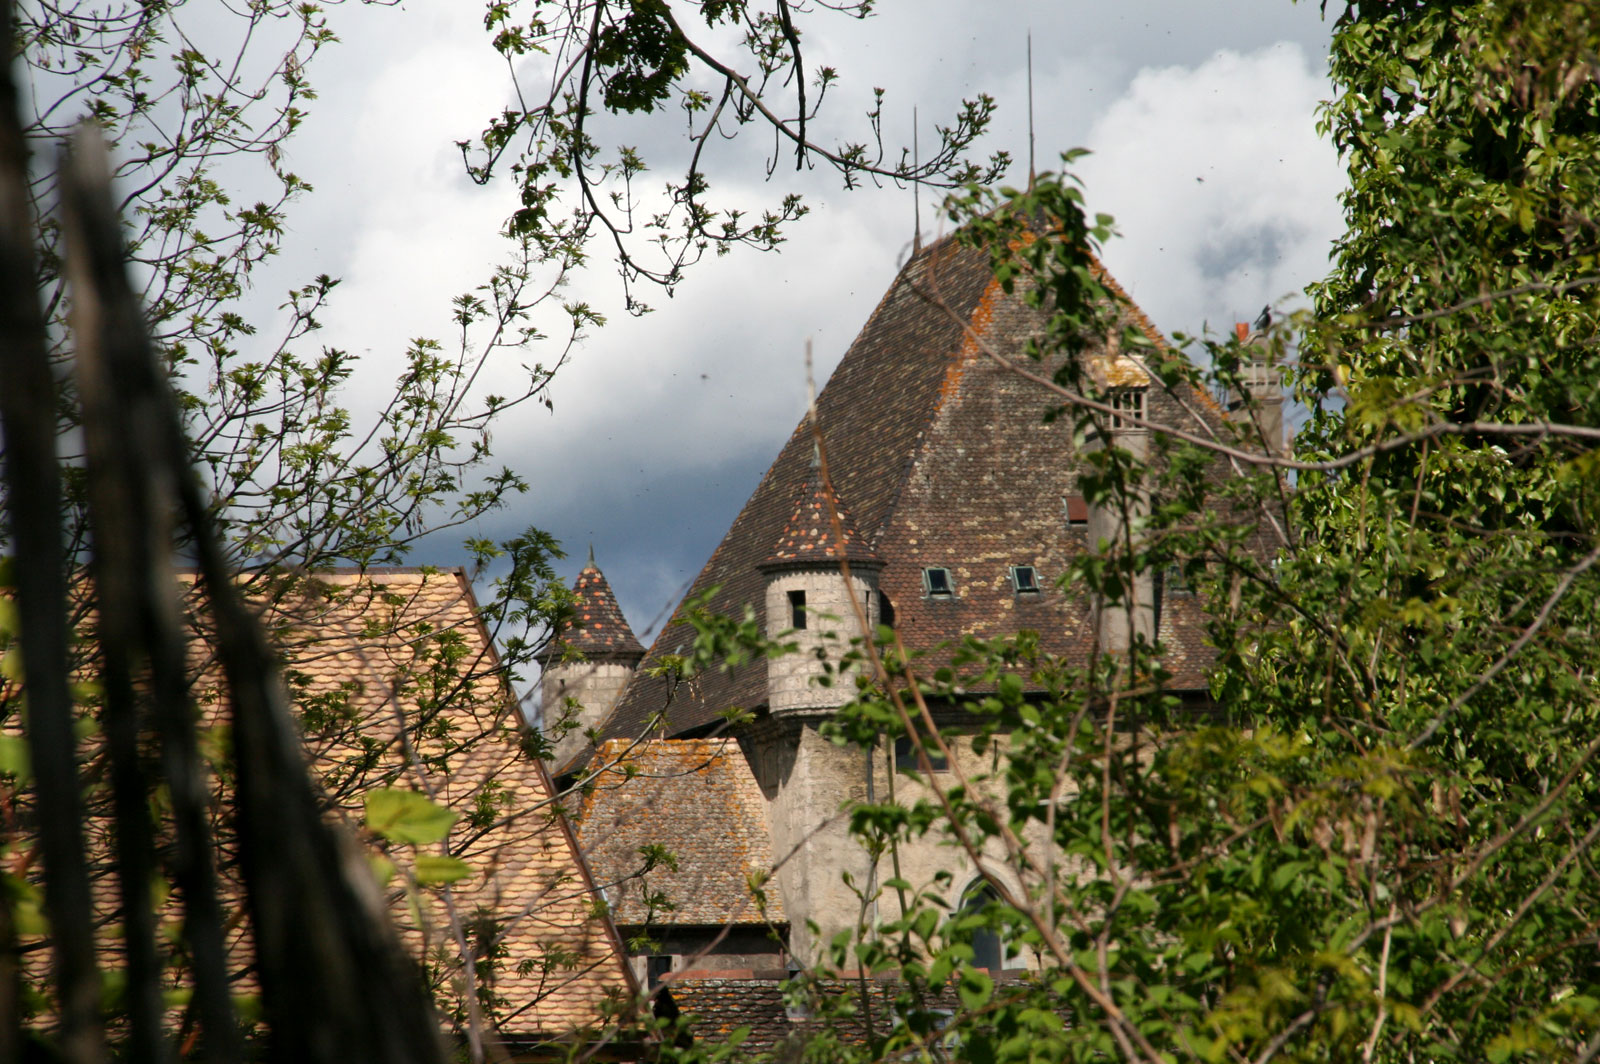 The roof of Yvoire castle when going to Rovorée.